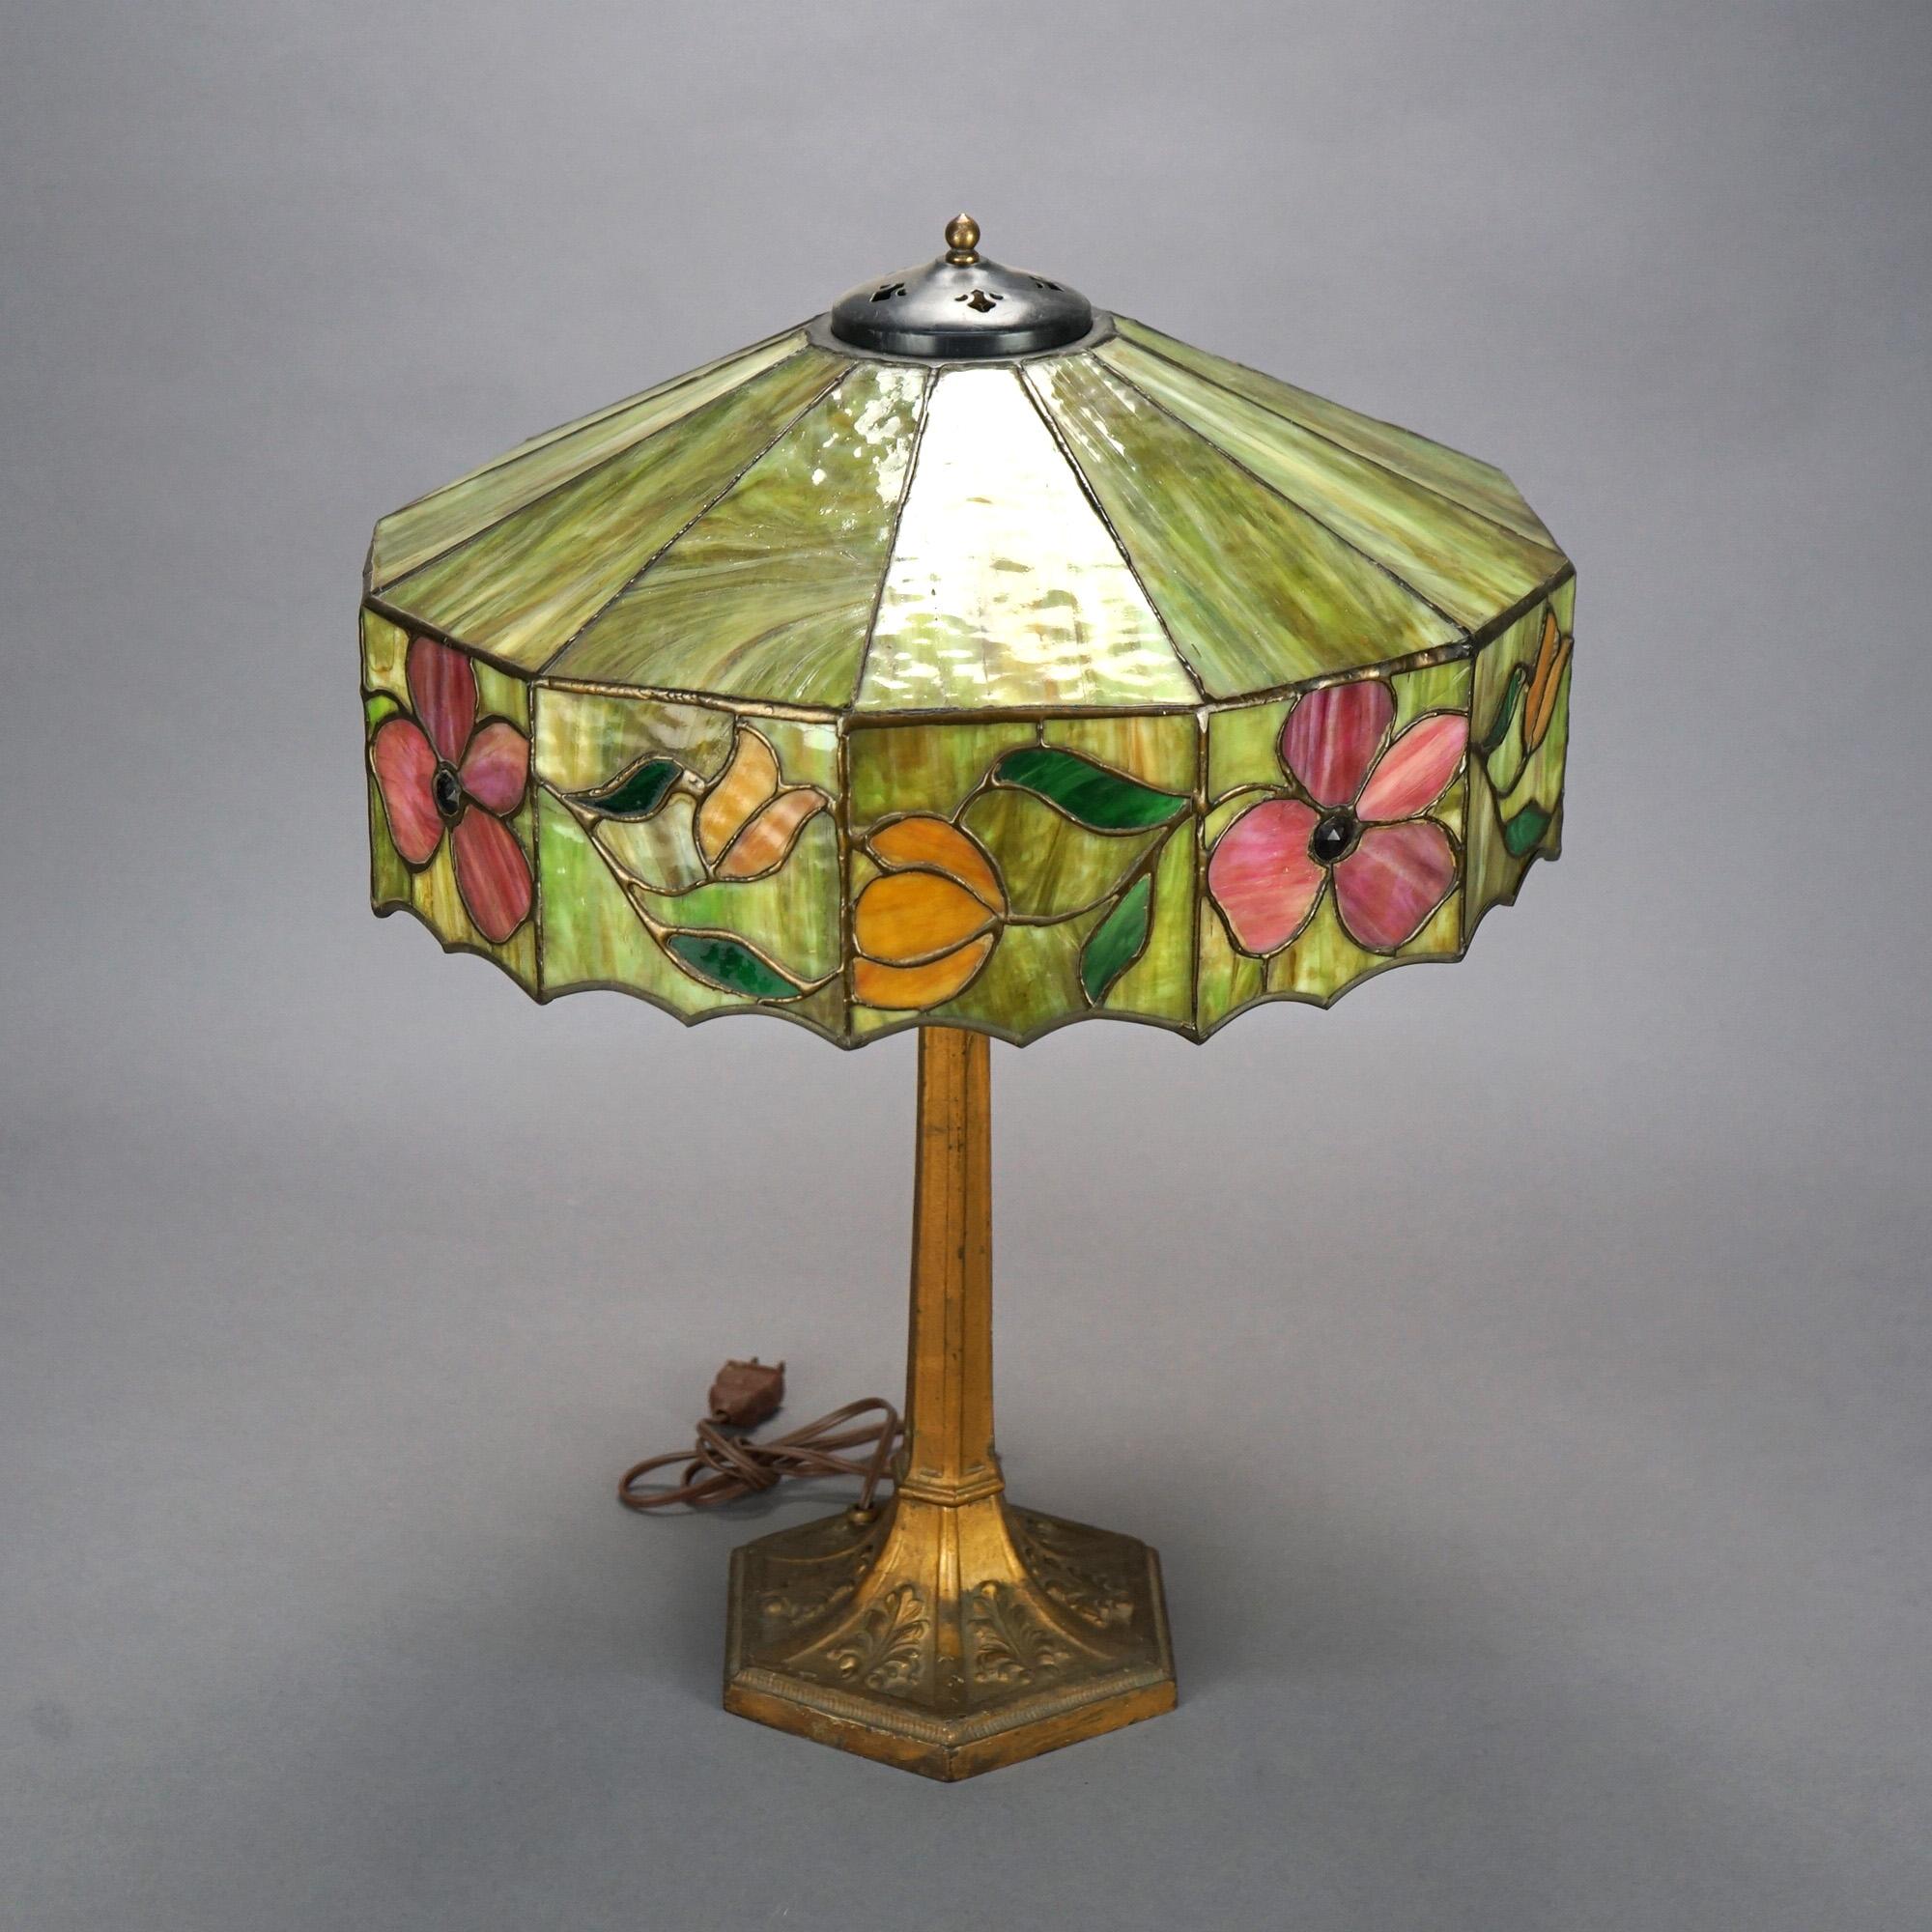 An antique Arts and Crafts table lamp offers leaded slag and jeweled glass shade with floral and scalloped rim over double socket cast base, c1920.

Measures- 22.75'' H x 17.25'' W x 17.25'' D.